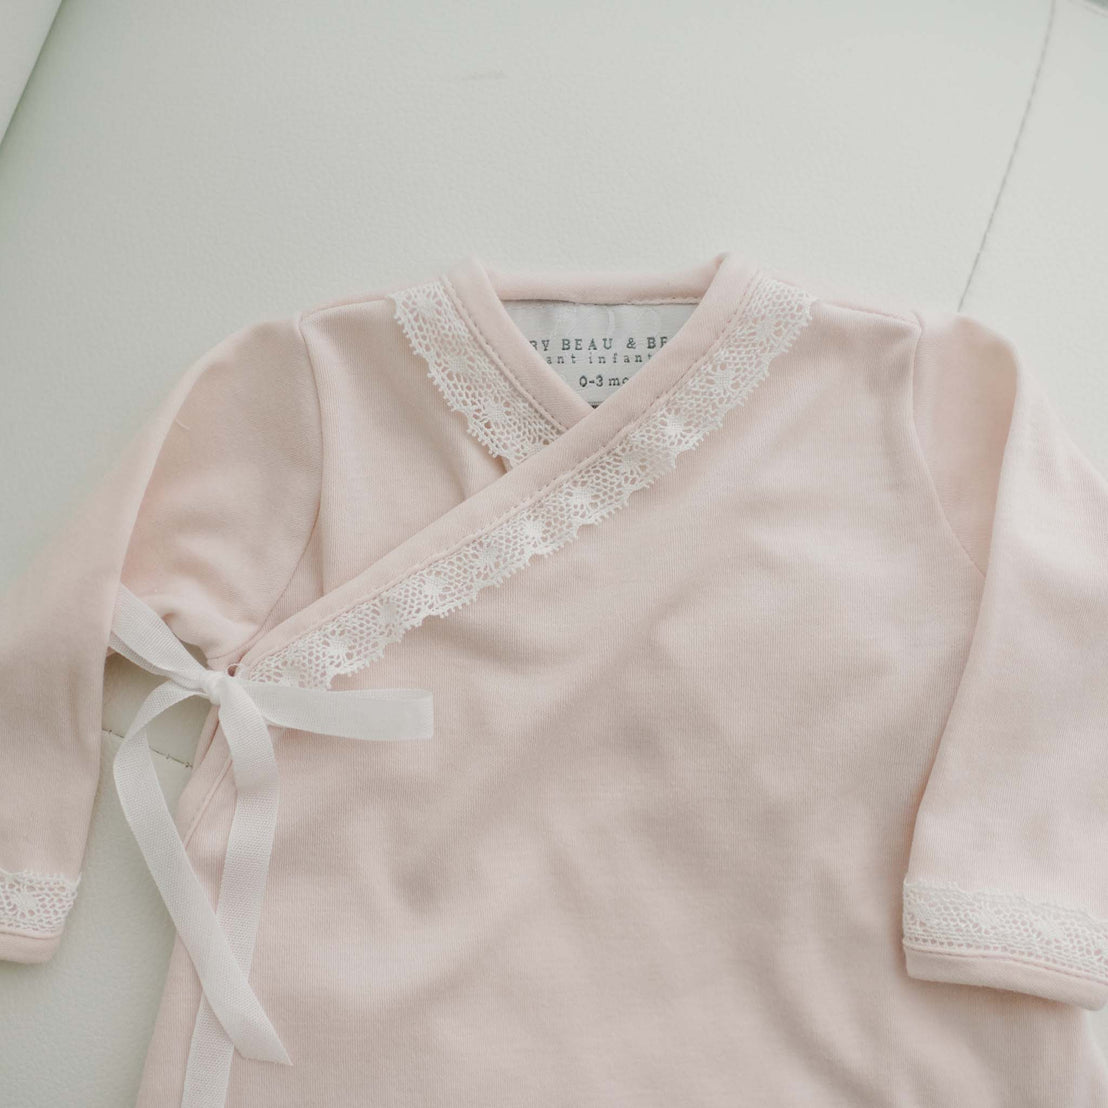 Lace detail on pink baby girl layette gown